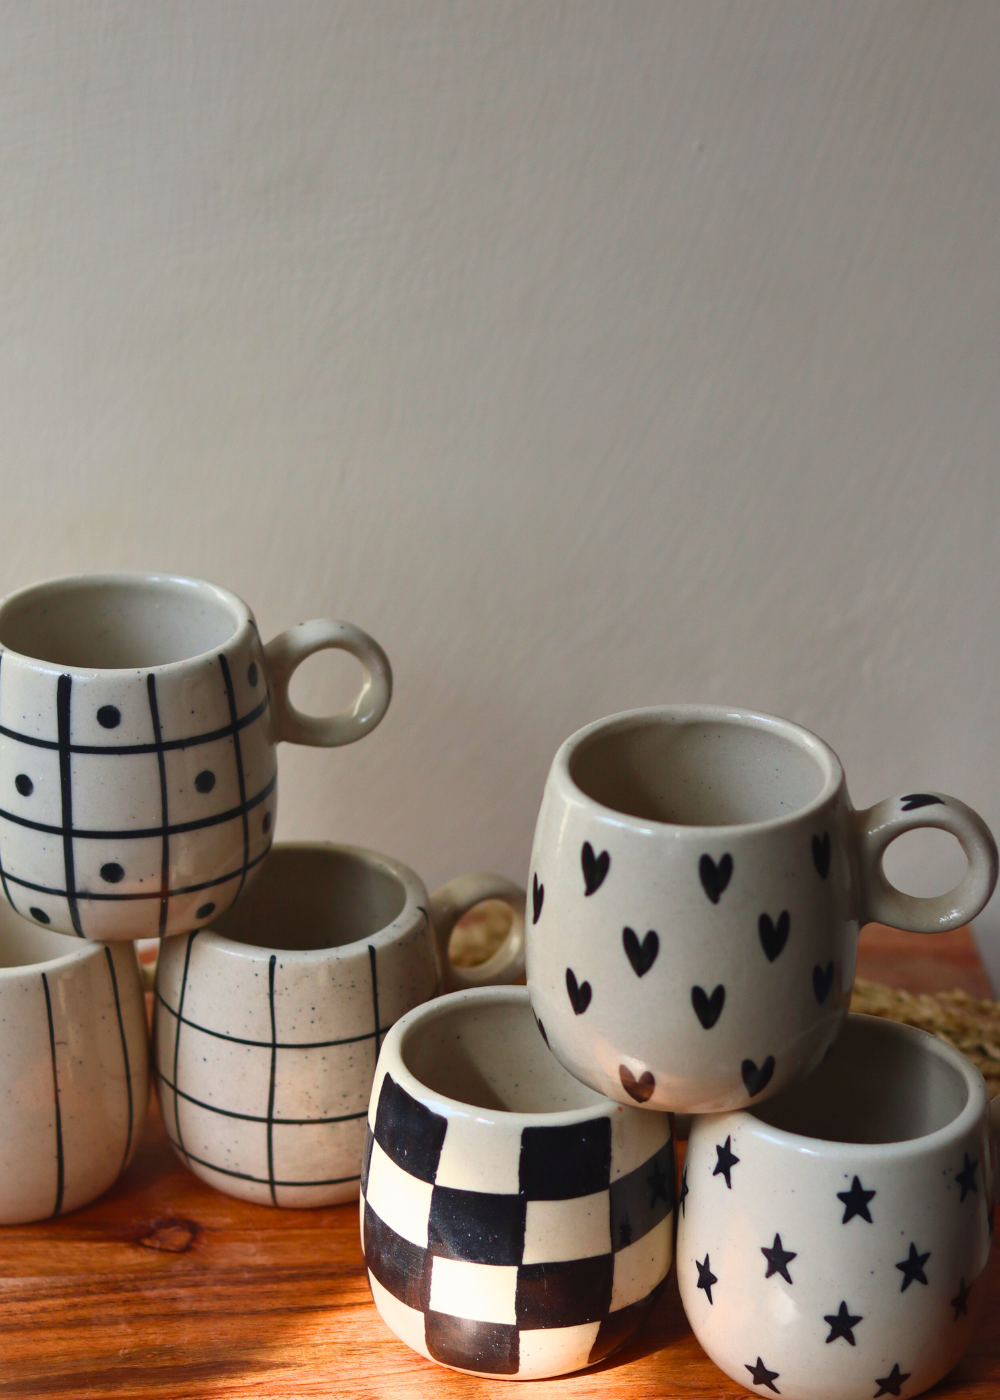 cuddle mugs with black & white color